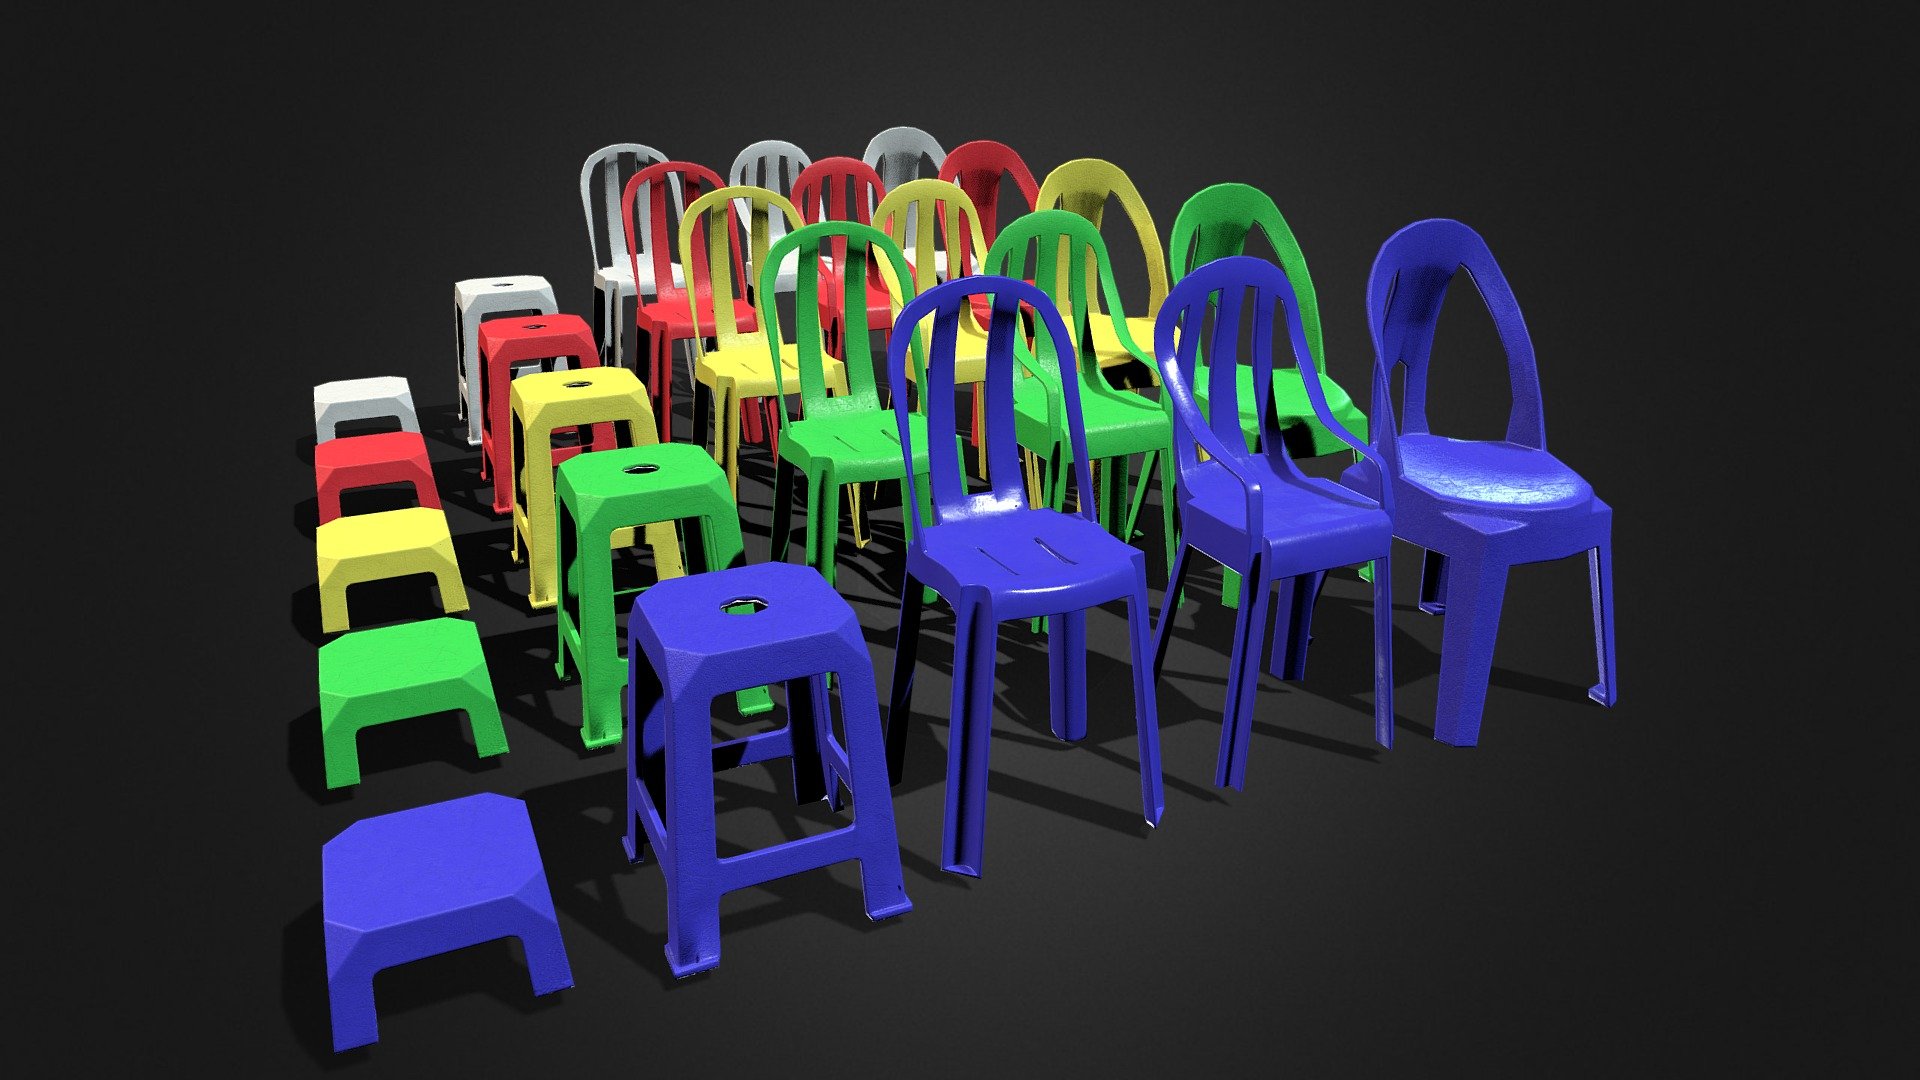 Blender 3.0.1

Adobe Substance Painter

Bake Highpoly to Lowpoly

Made from scratch from Rzyas



regards : Rzyas







 - Plastic Chair - 3D Lowpoly Game Asset - Buy Royalty Free 3D model by Rzyas 3d model